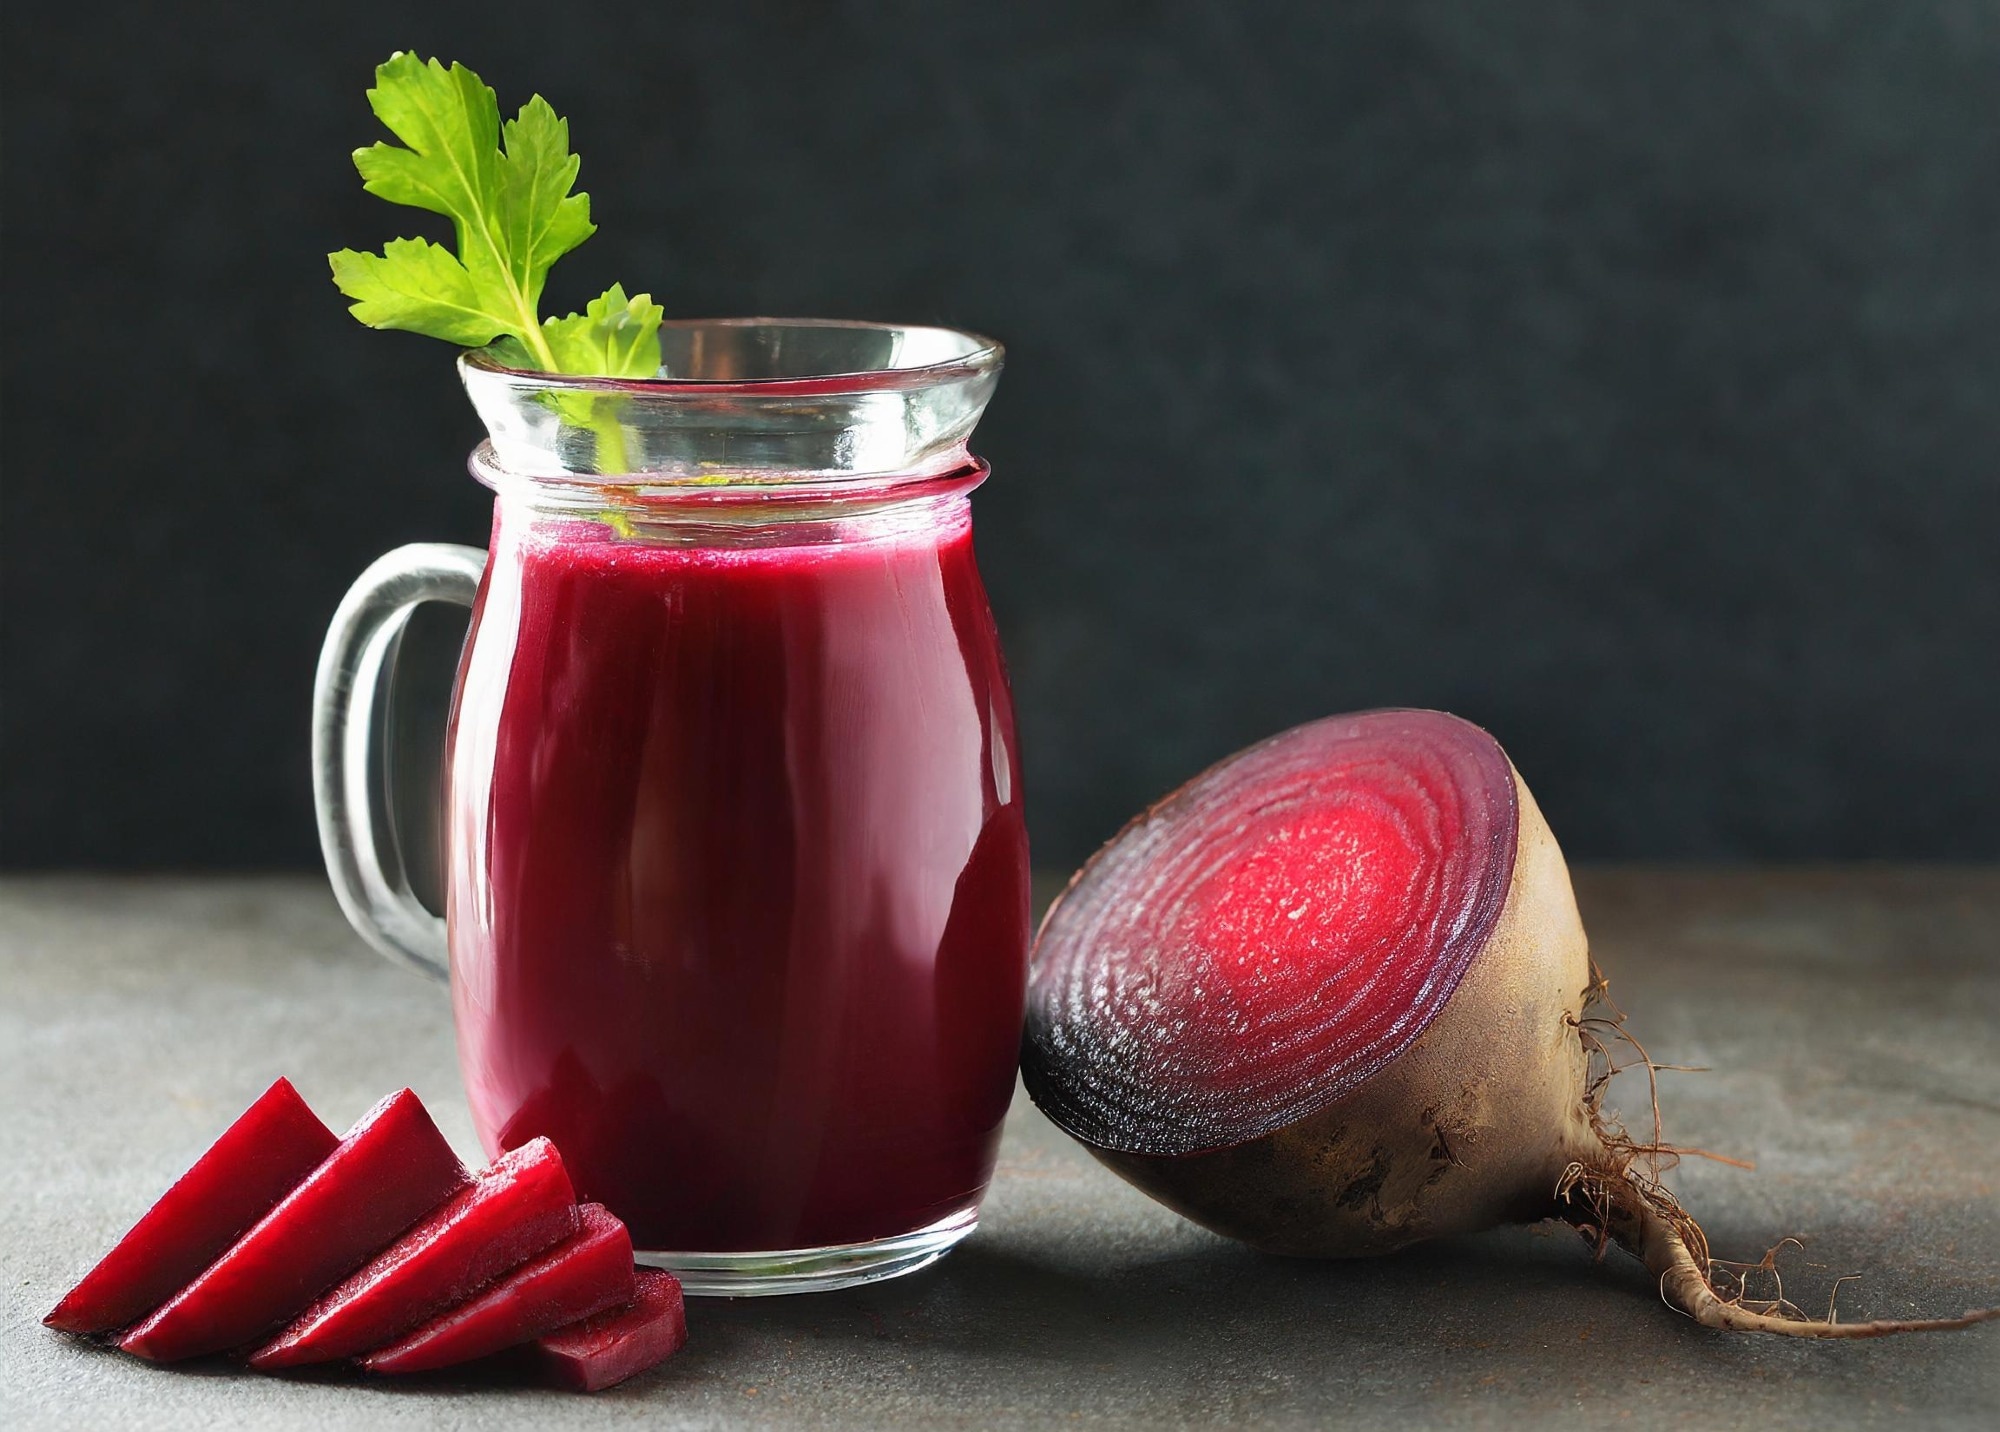 ImageForNews 772486 17085745389046190 - Beetroot juice outperforms nitrate supplements in enhancing exercise performance